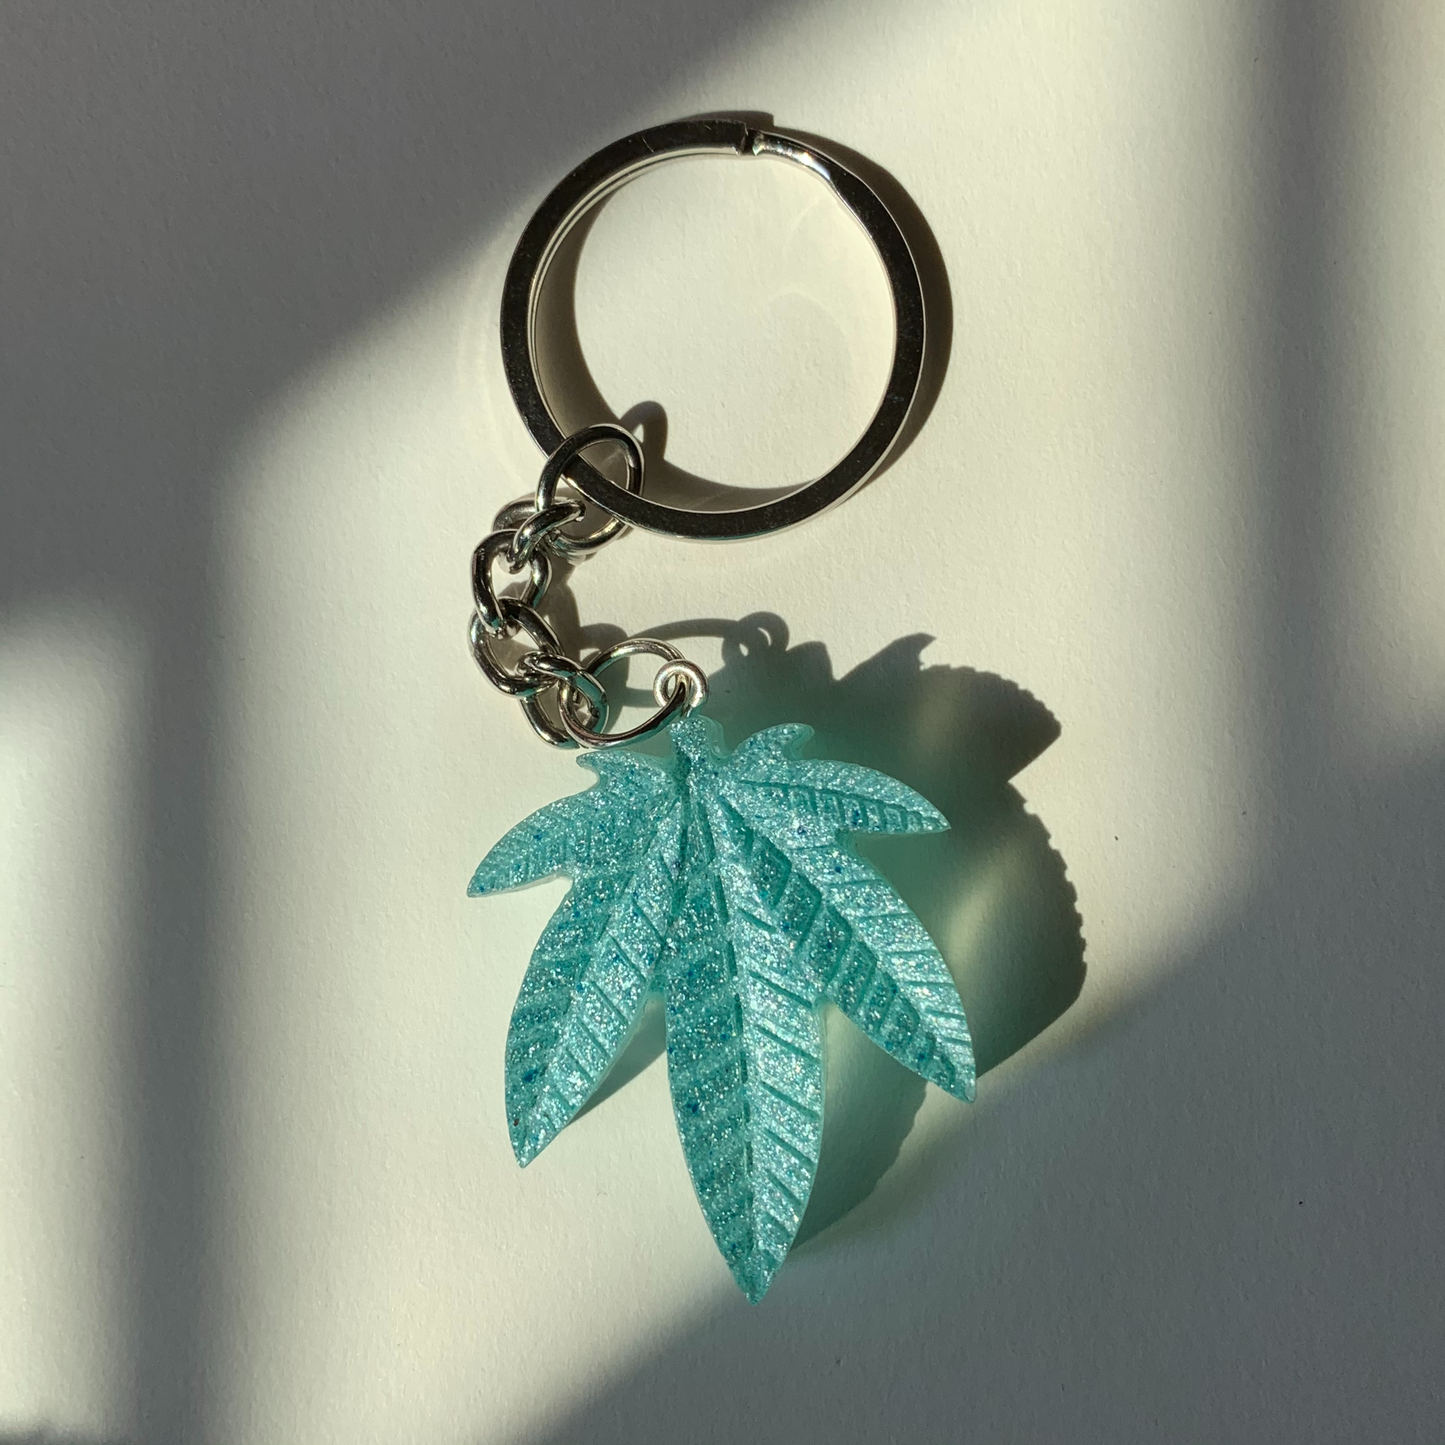 Keychains, resin, holographic, blue, Sparkle, orange, handmade, collection, green, light, pink, buynowwww.slimjim.in, shoponslimjim, keychain,